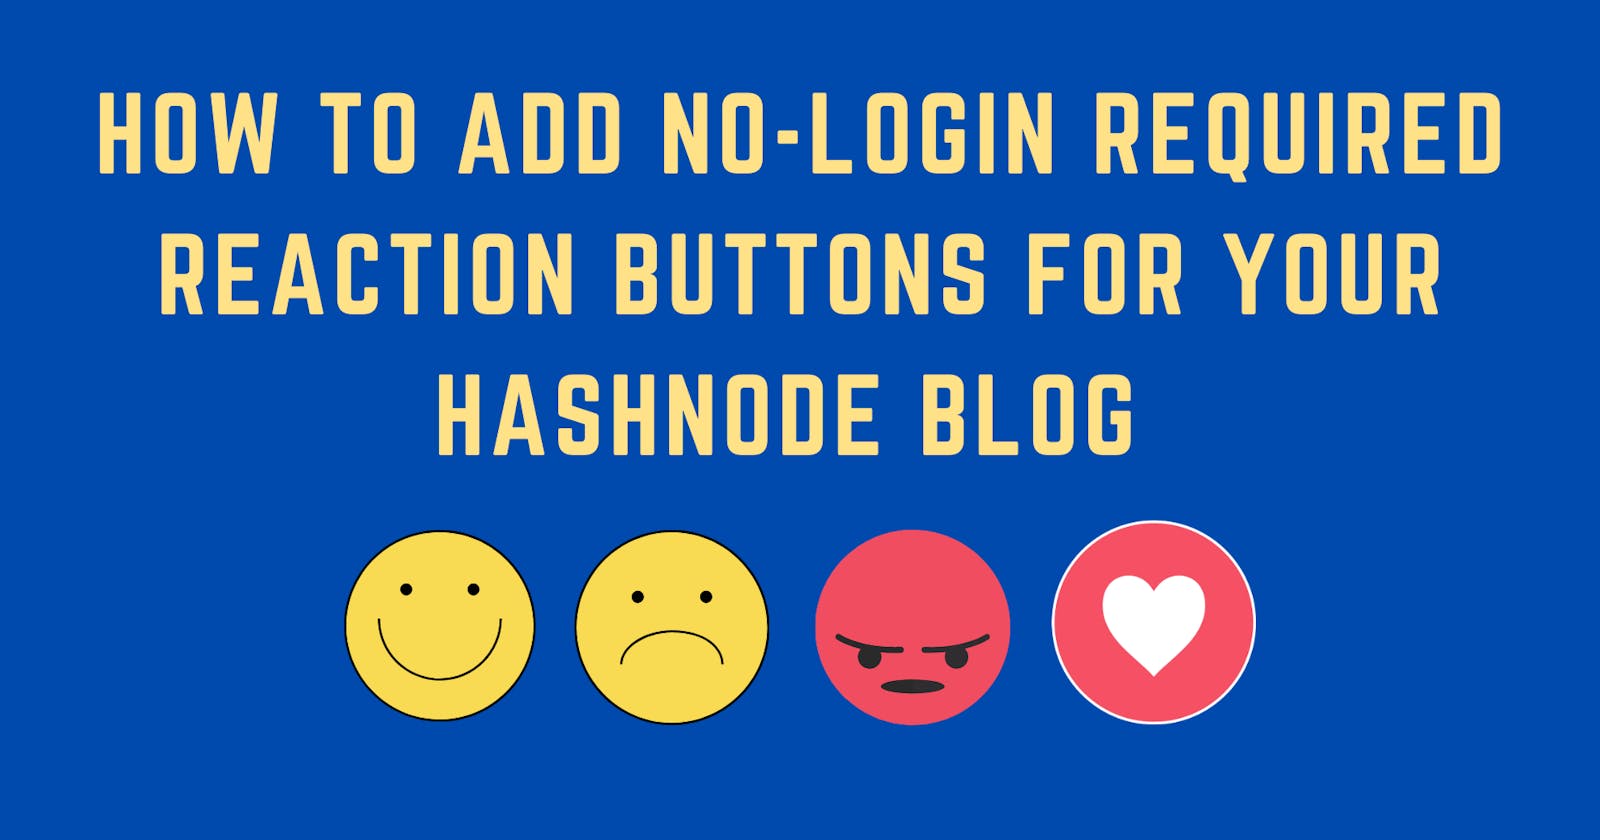 How To Add No-Login Required Reaction Buttons For Your Hashnode Blog